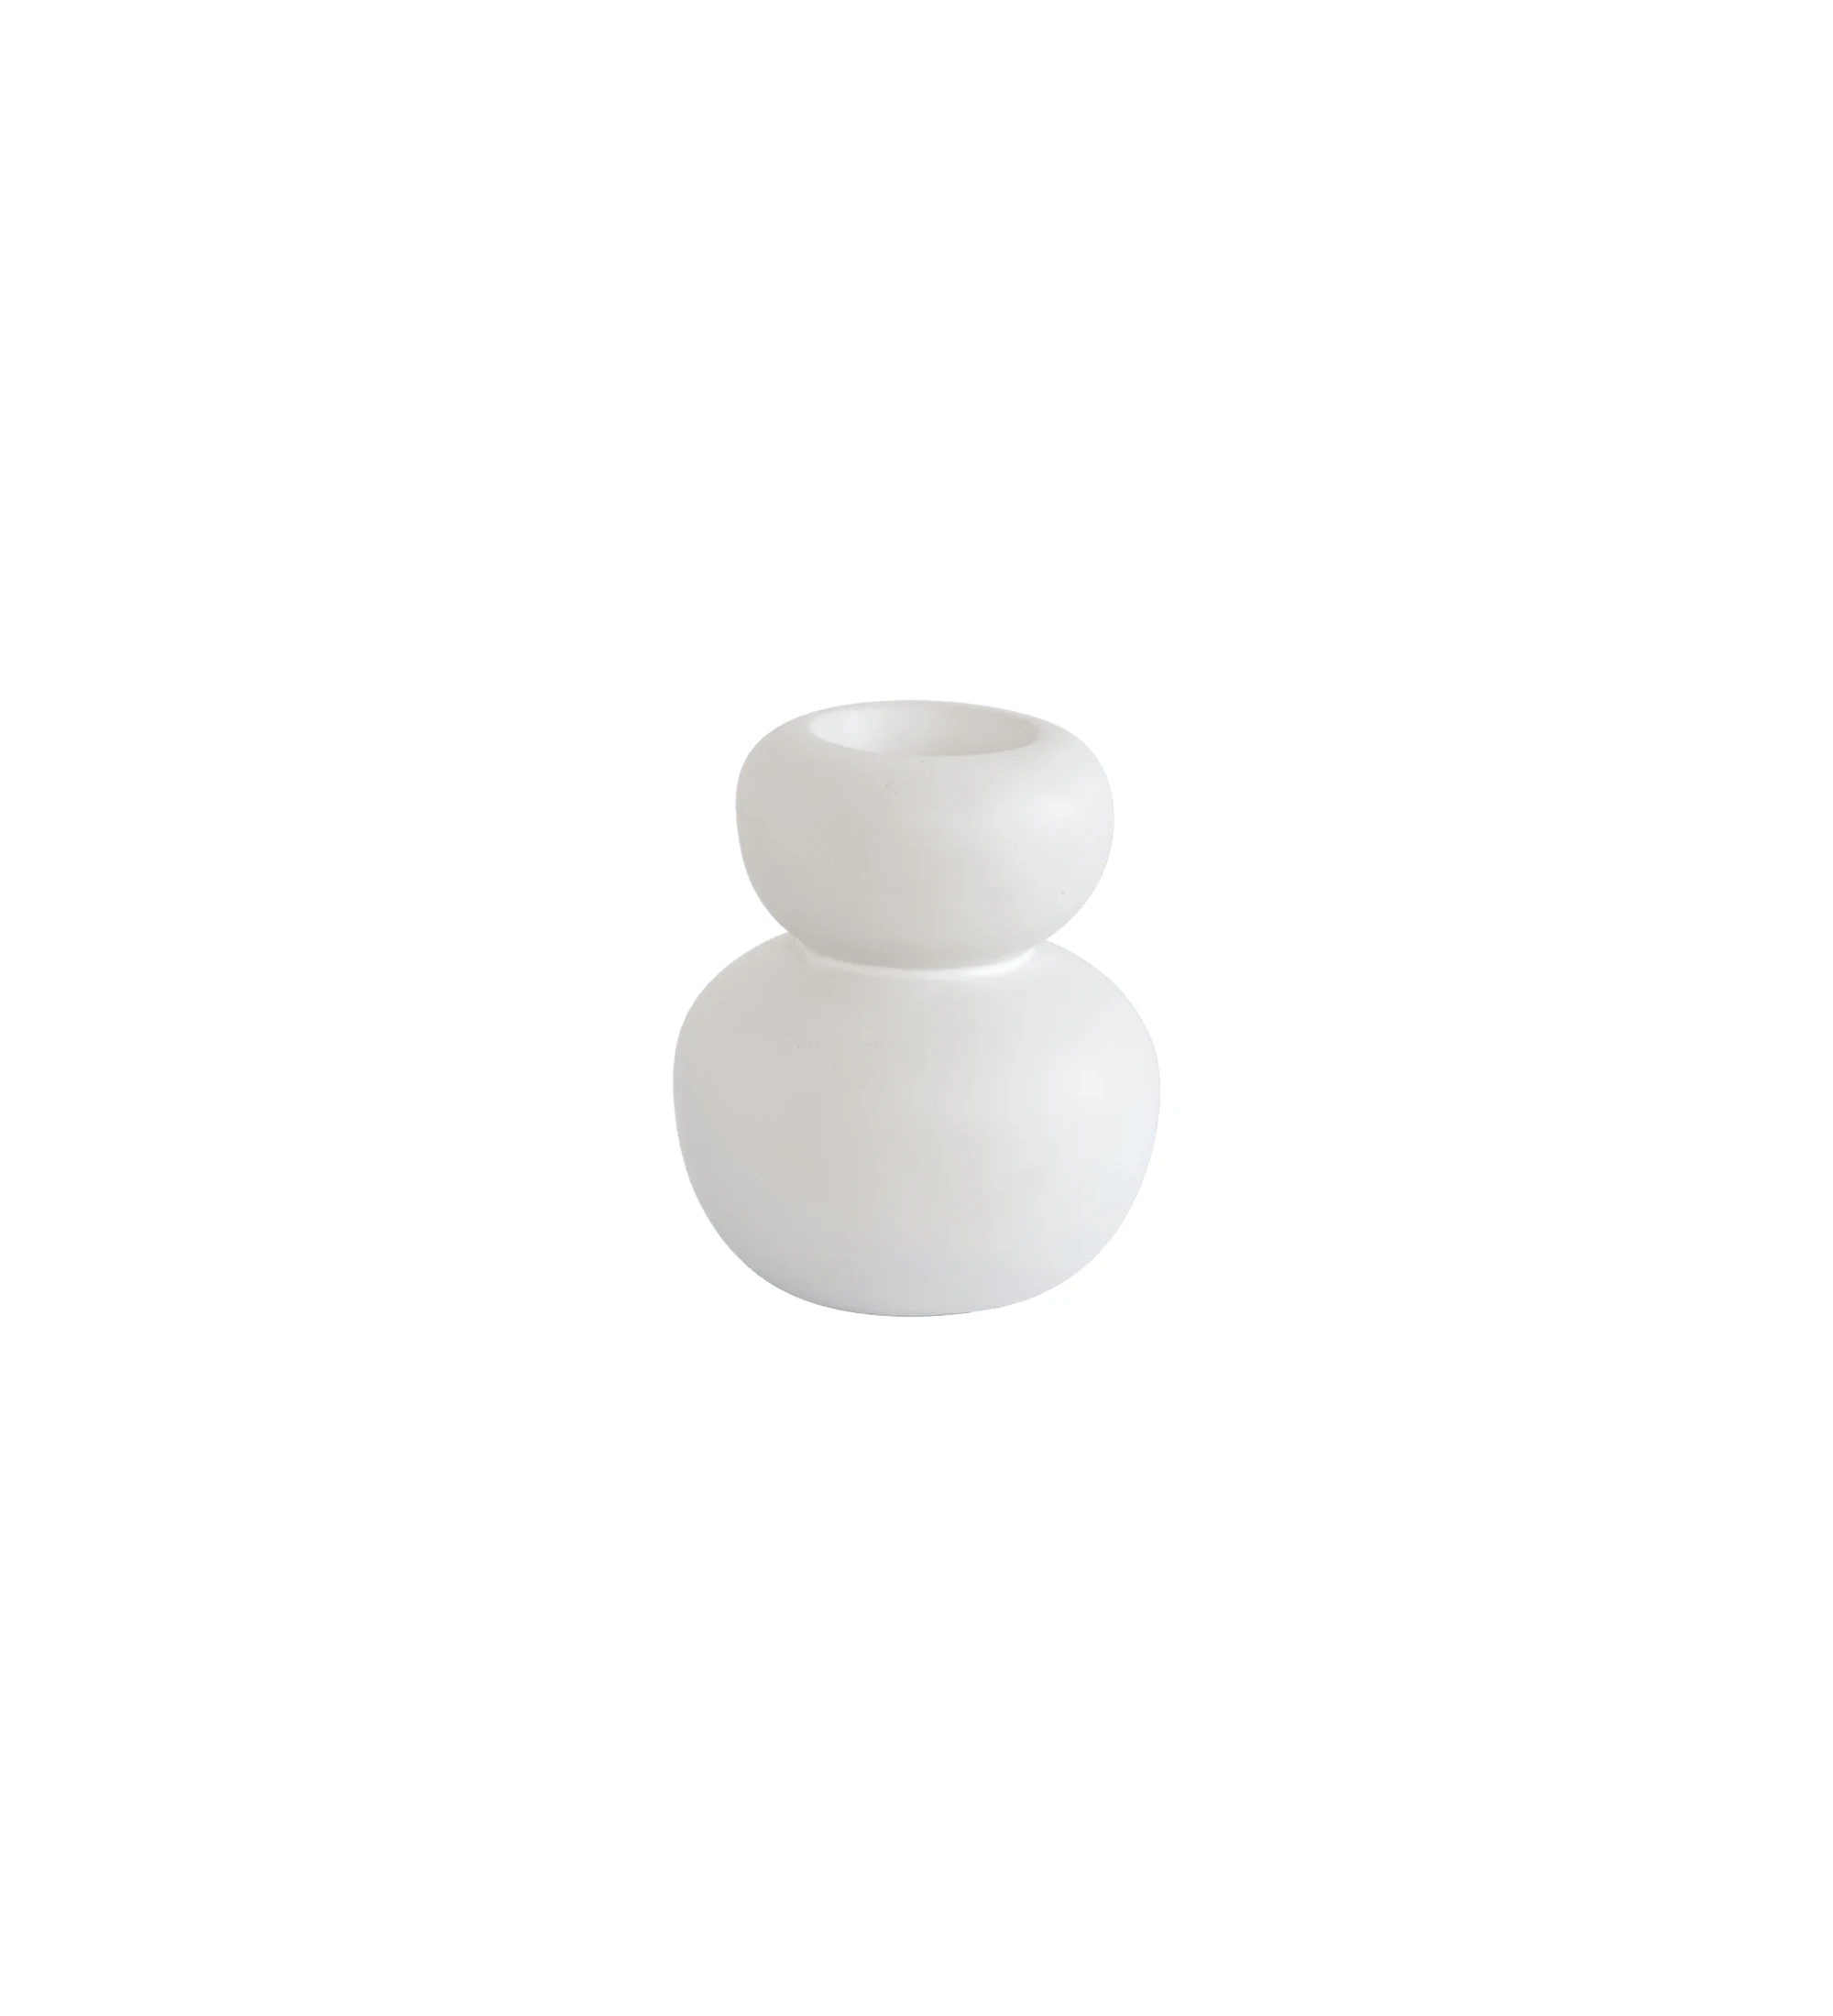 Candle holder in smooth matte white color and with ceramic structure.